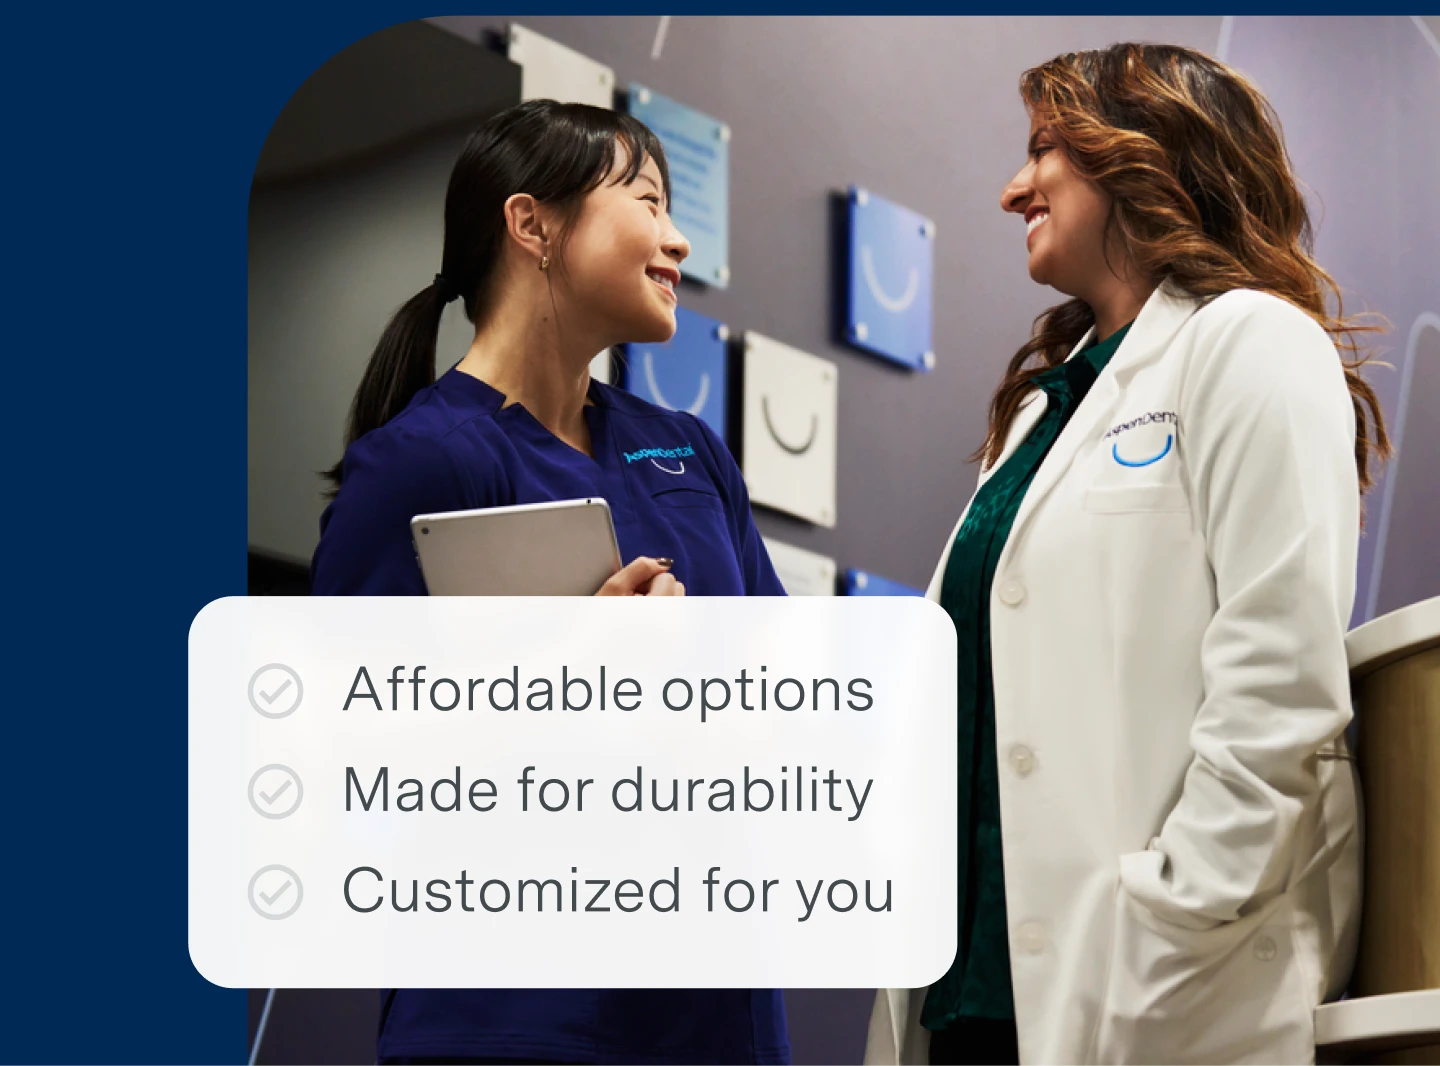 An Aspen Dental dentist and dental assistant engaged in conversation with the following bullet points on the image describing advantages of traditional full dentures:
Affordable options
Made for durability
Leading warranties